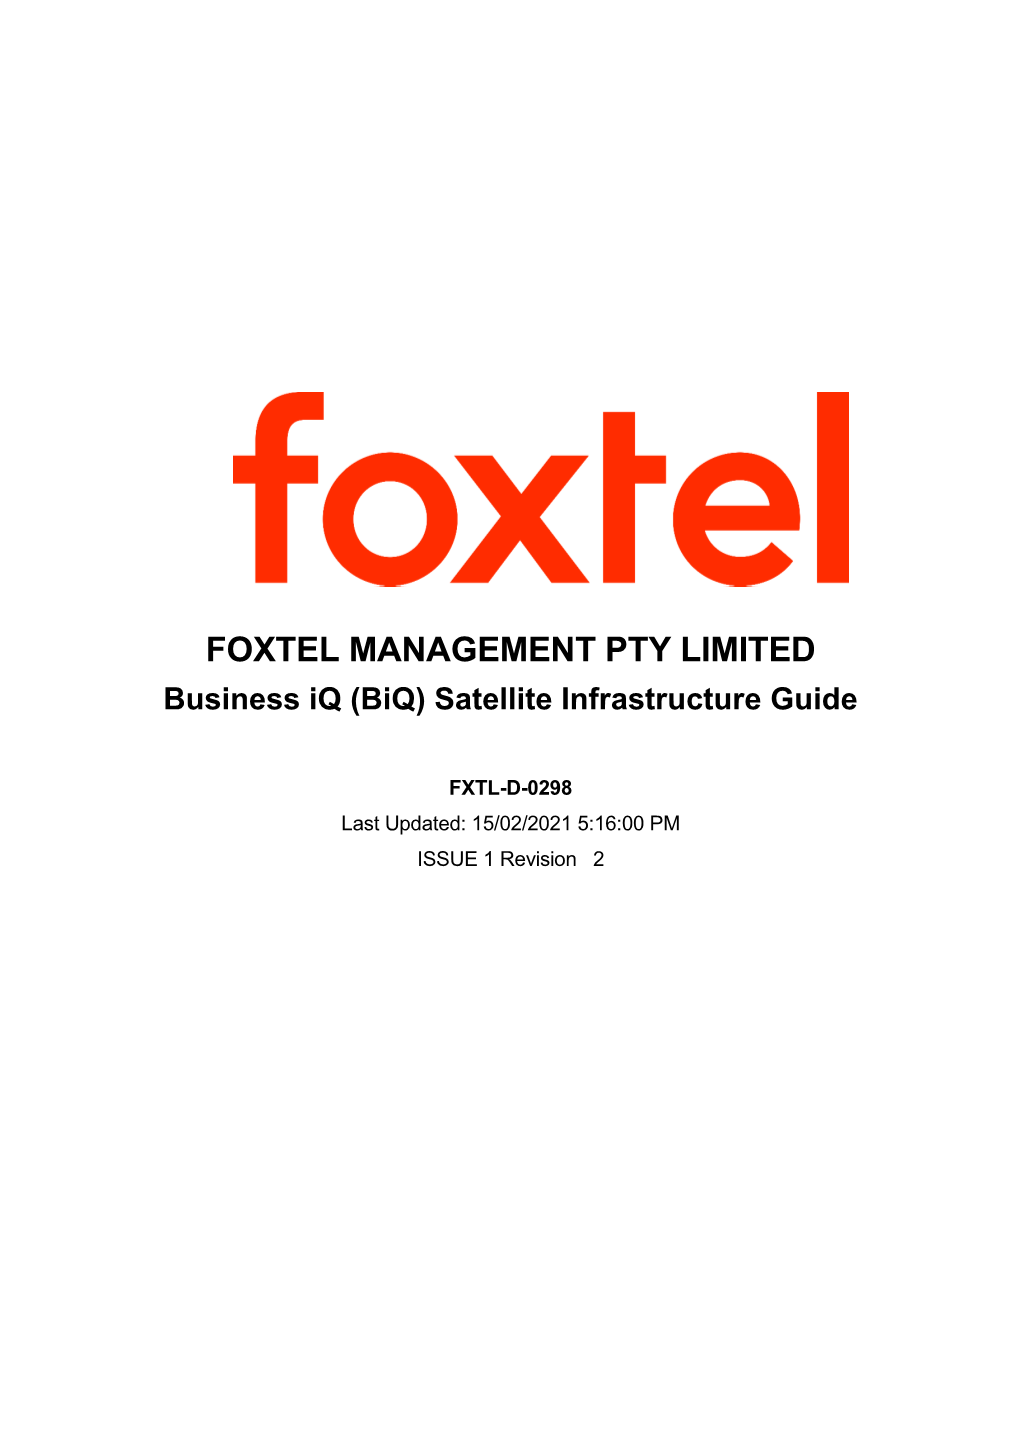 FOXTEL MANAGEMENT PTY LIMITED Business Iq (Biq) Satellite Infrastructure Guide